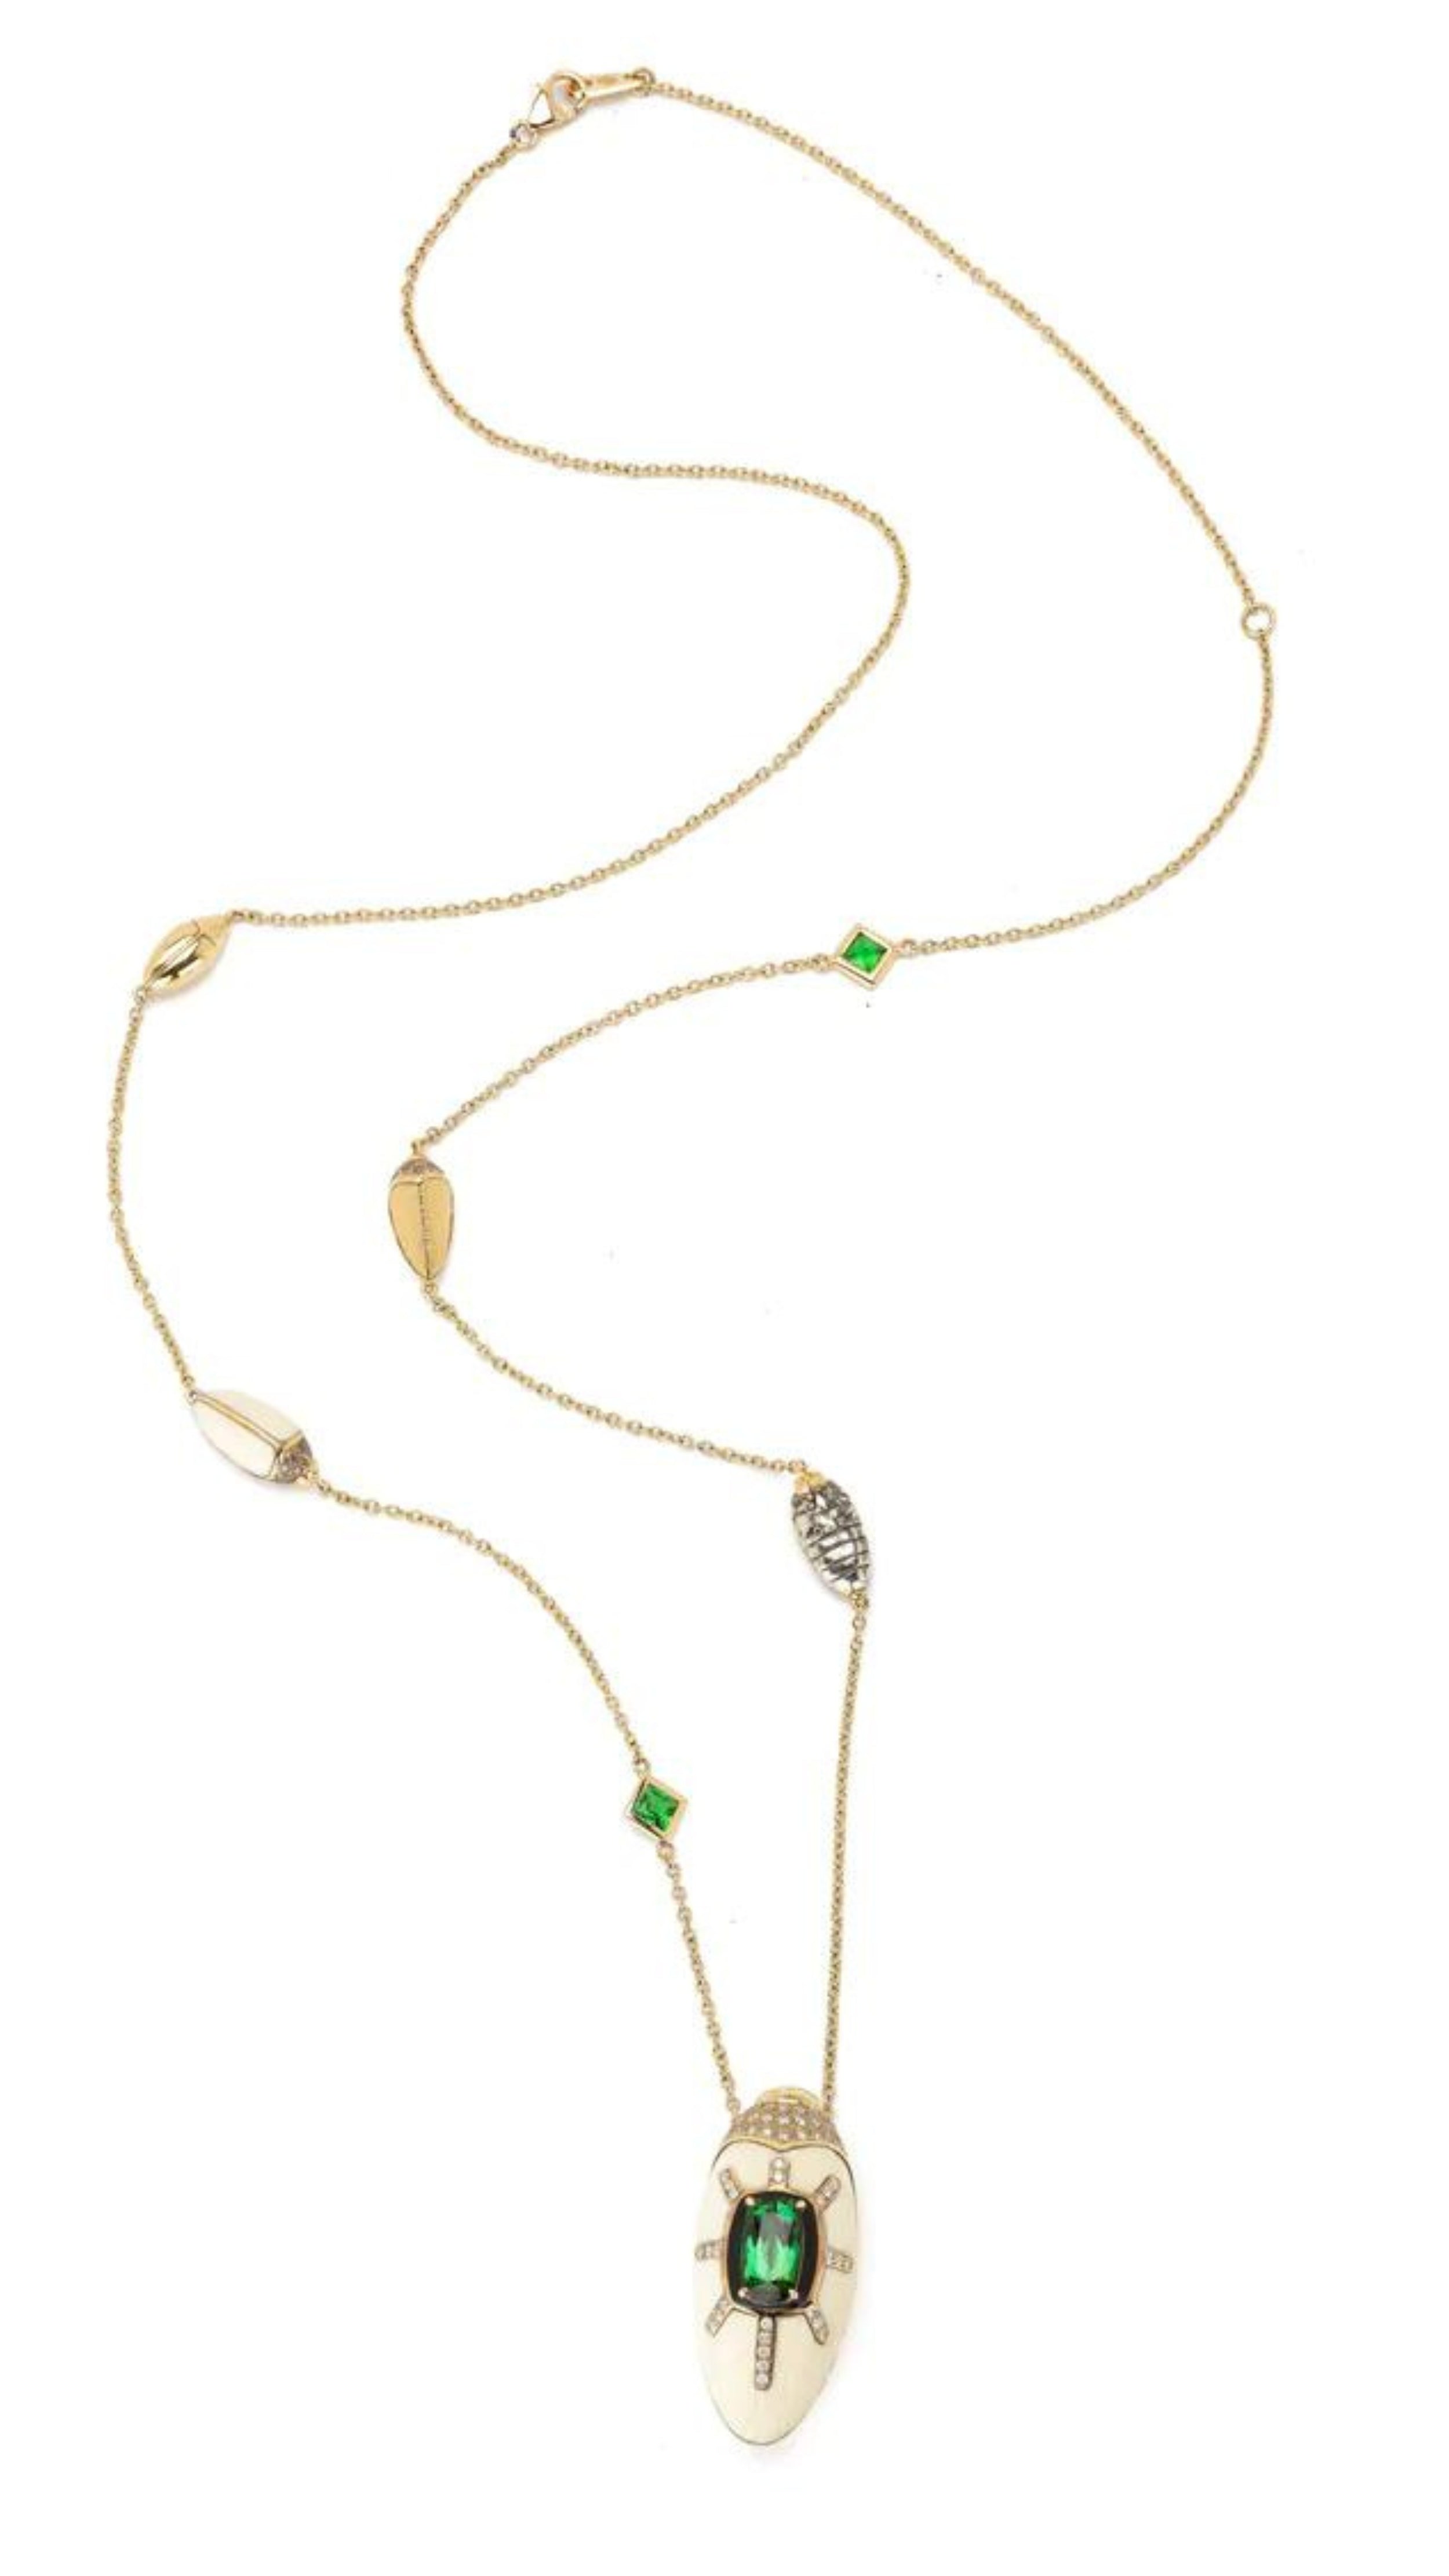 Bibi van der Velden Scarab Mammoth Necklace. Art deco style scarab pendant drop crafted from mammoth tusk and set with green tsavorite stones and pave white and brown diamonds. With links in the chain of scarabs and inset stones. Adjustable length necklace. Sustainable high jewelry. Photo showing the entire length of necklace from the front.